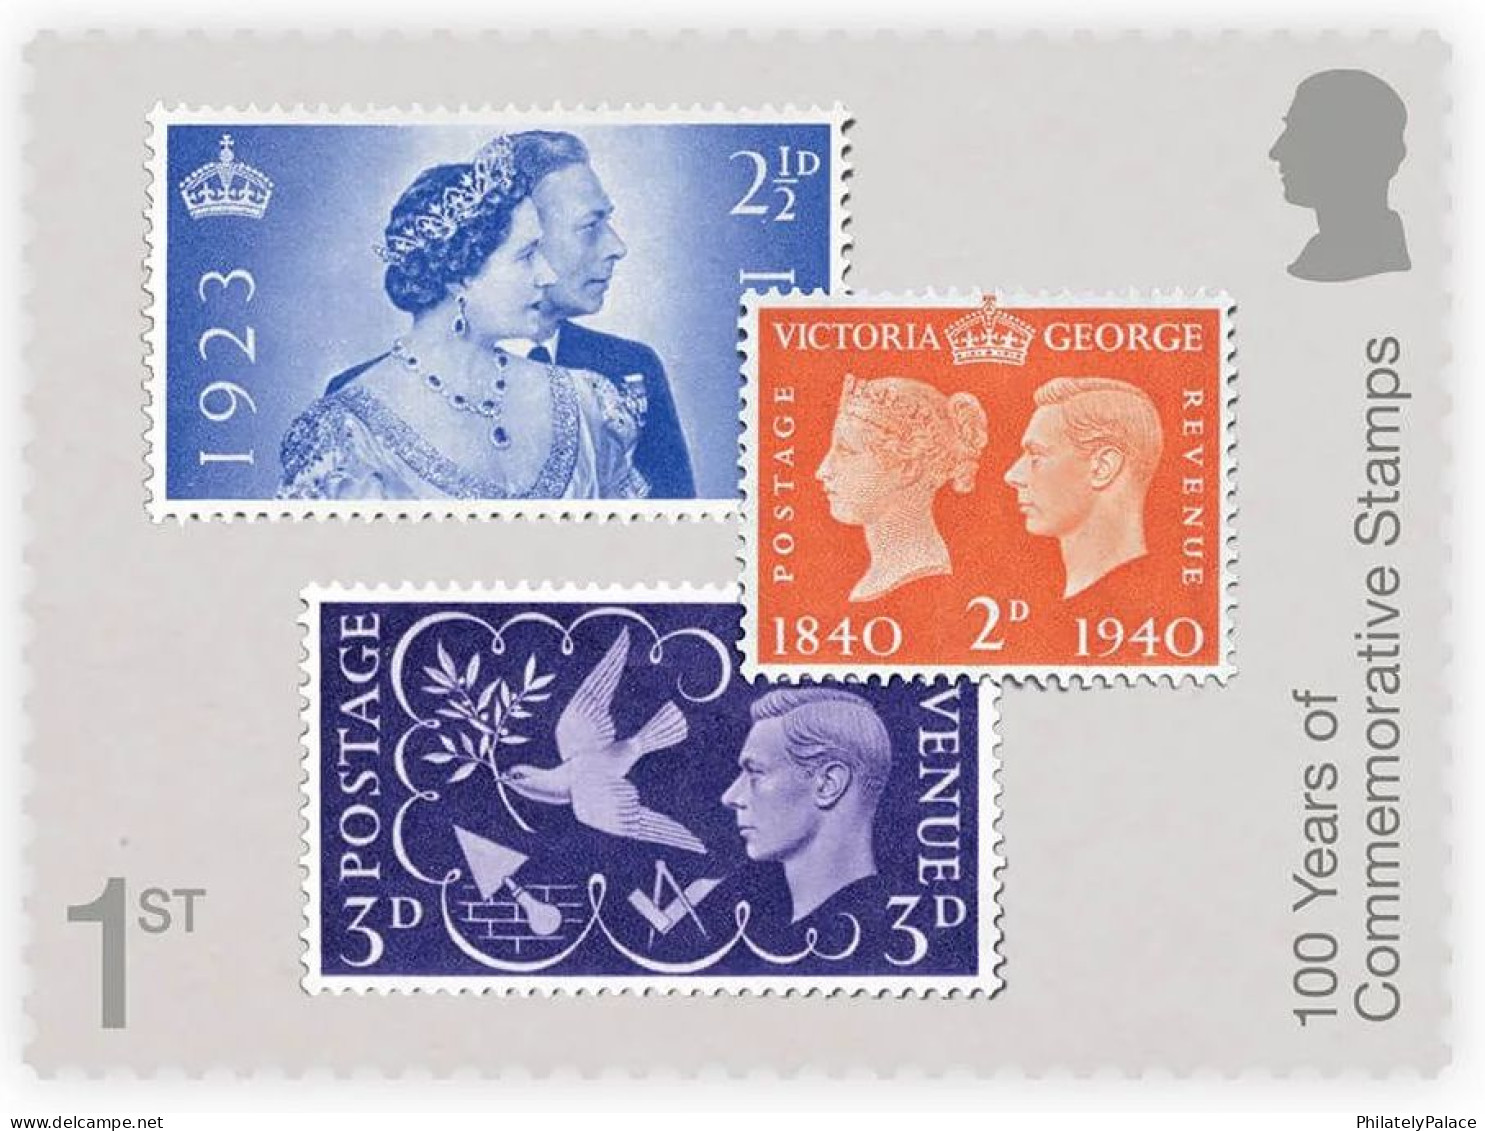 Great Britain (UK) New 2024 ,Stamp On Stamp, Lion,Queen,Butterfly,Flower,Music,Architecture, FDC Cover+ Brochure (**) - Covers & Documents